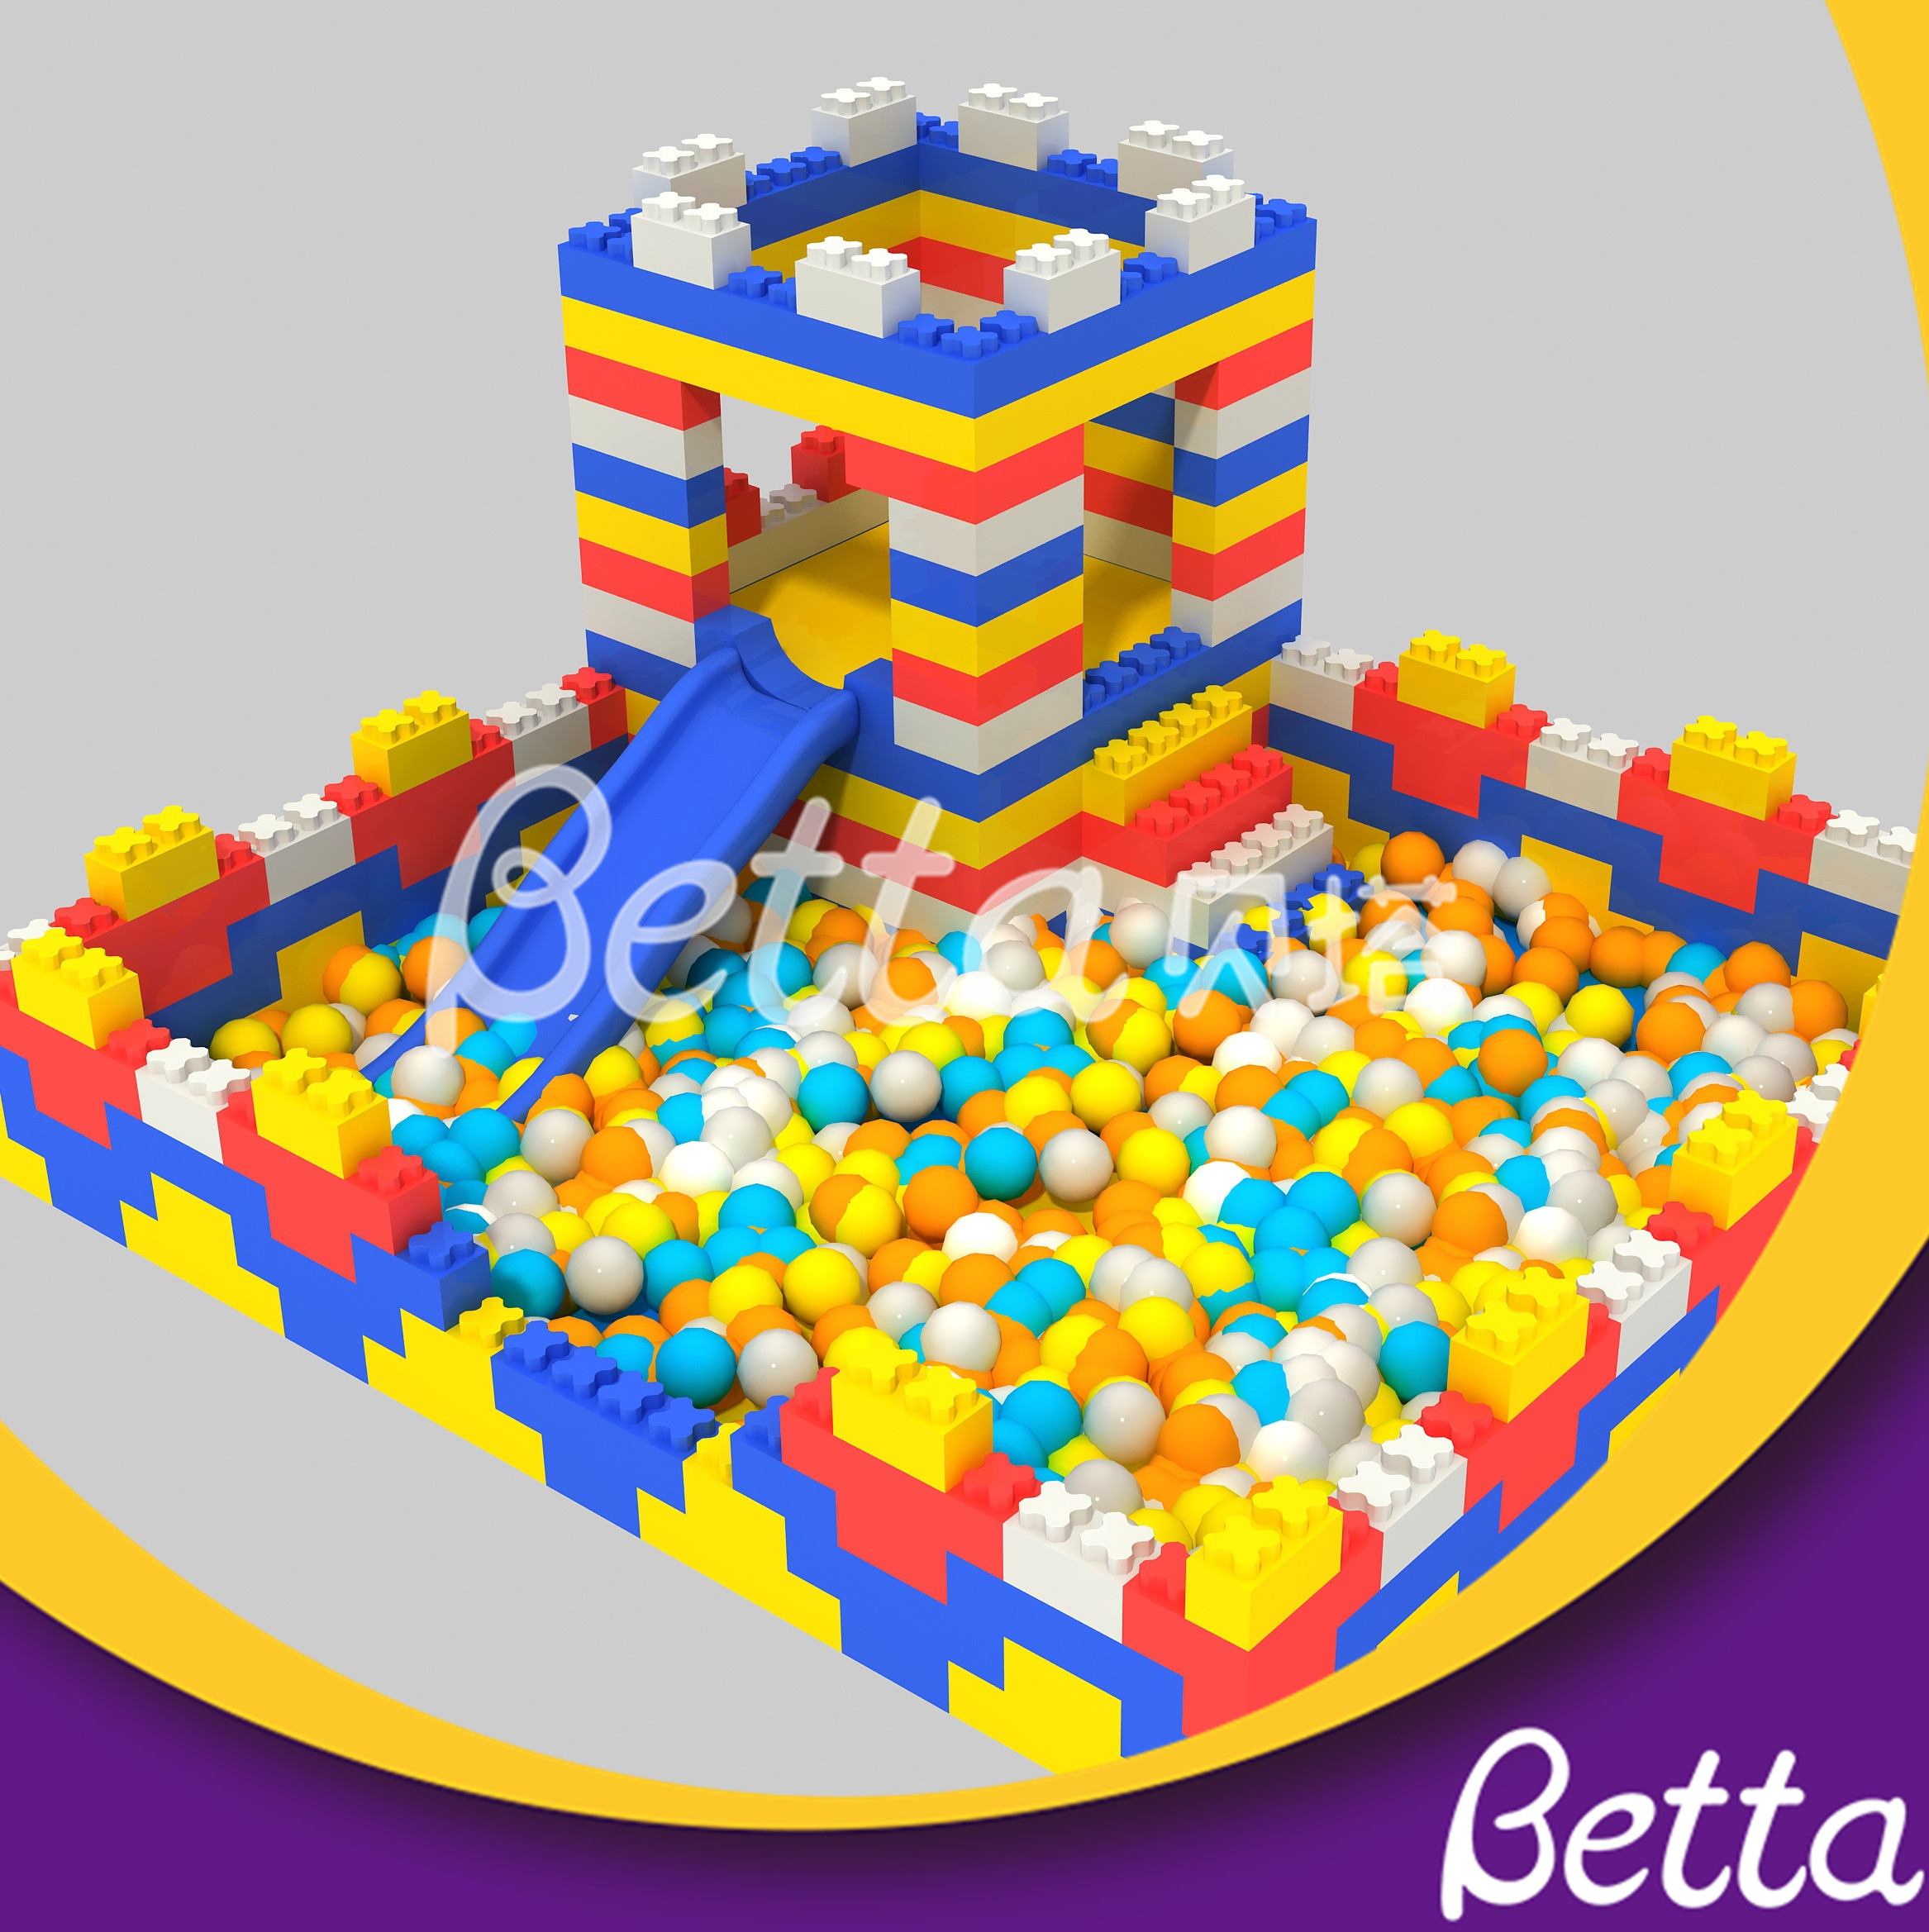 Bettaplay Hot Sale Epp Foam Block Building DIY Customized Educational Toy for Kids Indoor Playground